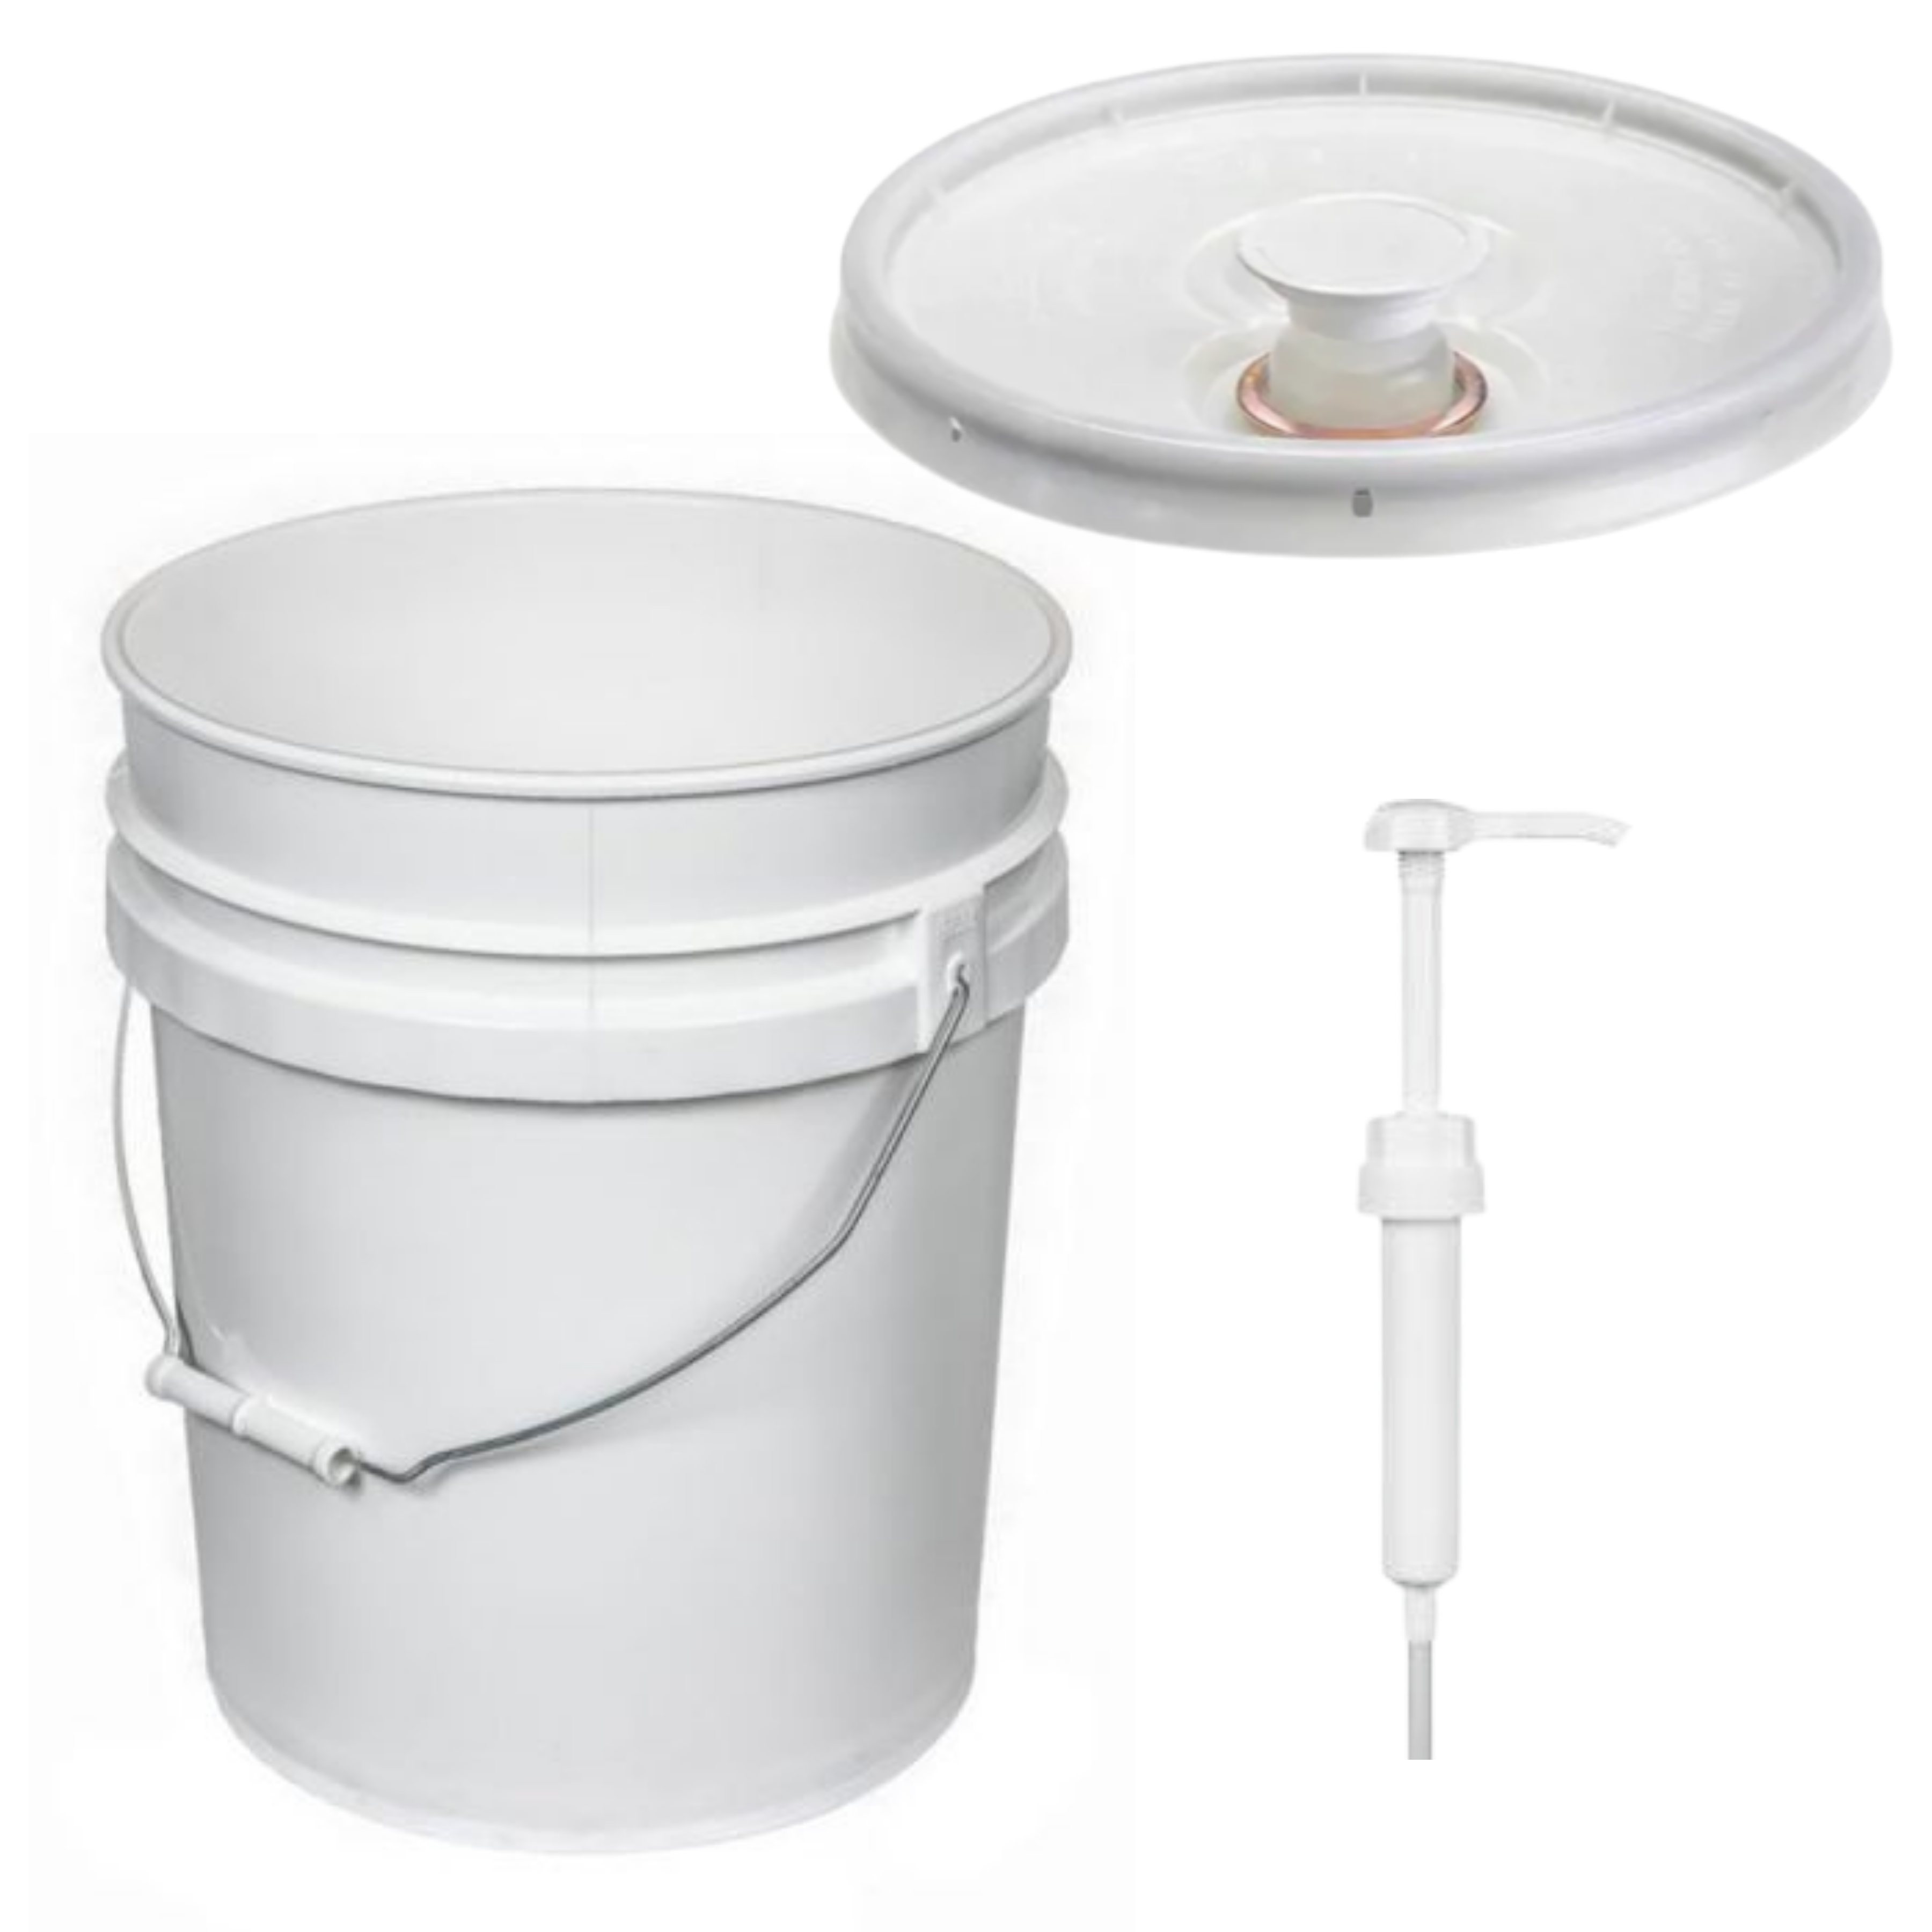 White Bucket Lid with Spout